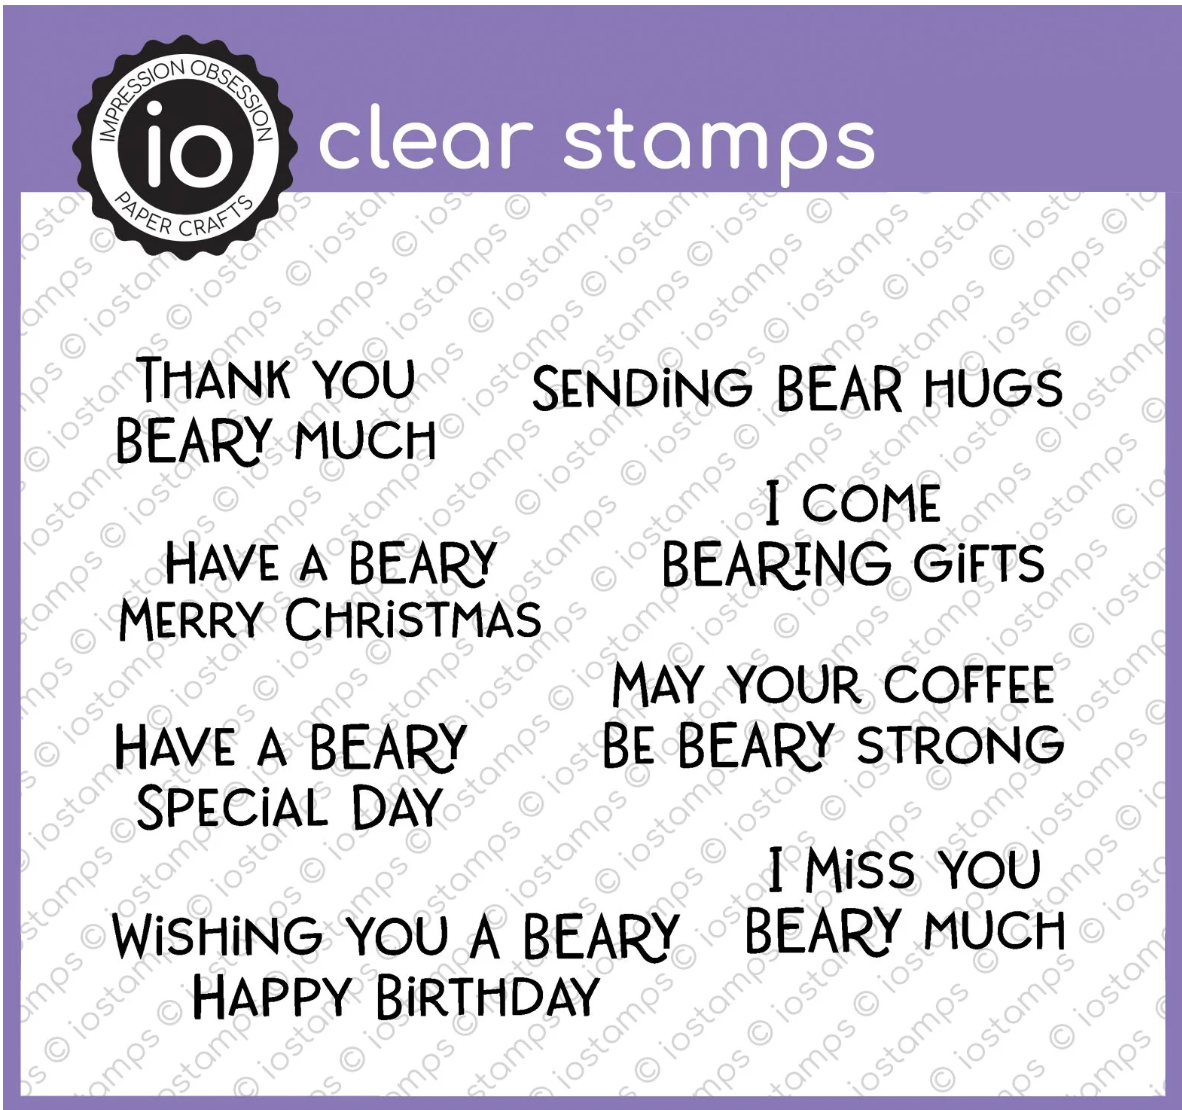 New Fiskars SIMPLE EXPRESSIONS Clear Stamp Set 17 Clear Stamps Sentiments